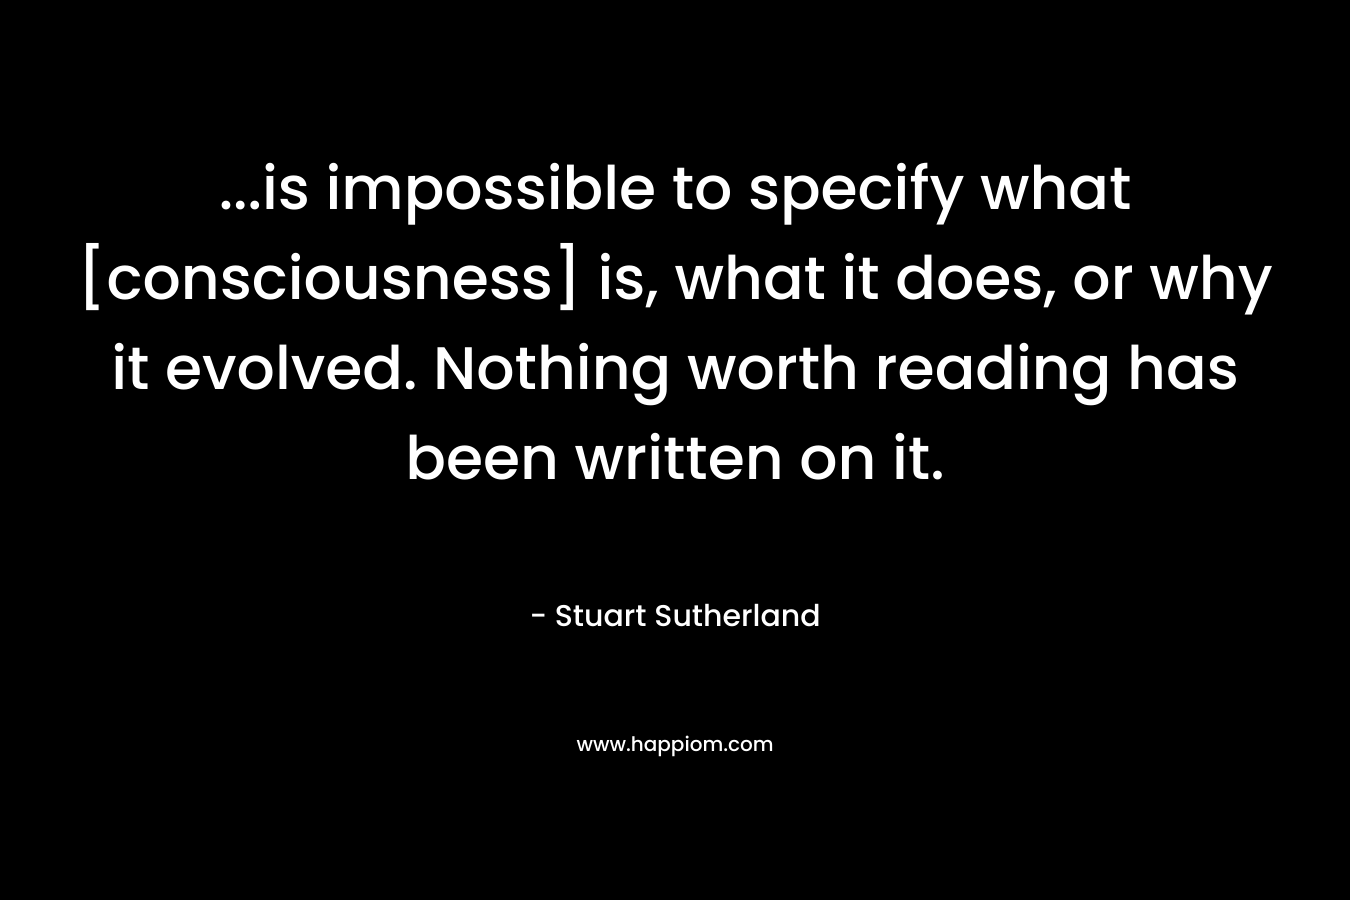 …is impossible to specify what [consciousness] is, what it does, or why it evolved. Nothing worth reading has been written on it. – Stuart Sutherland